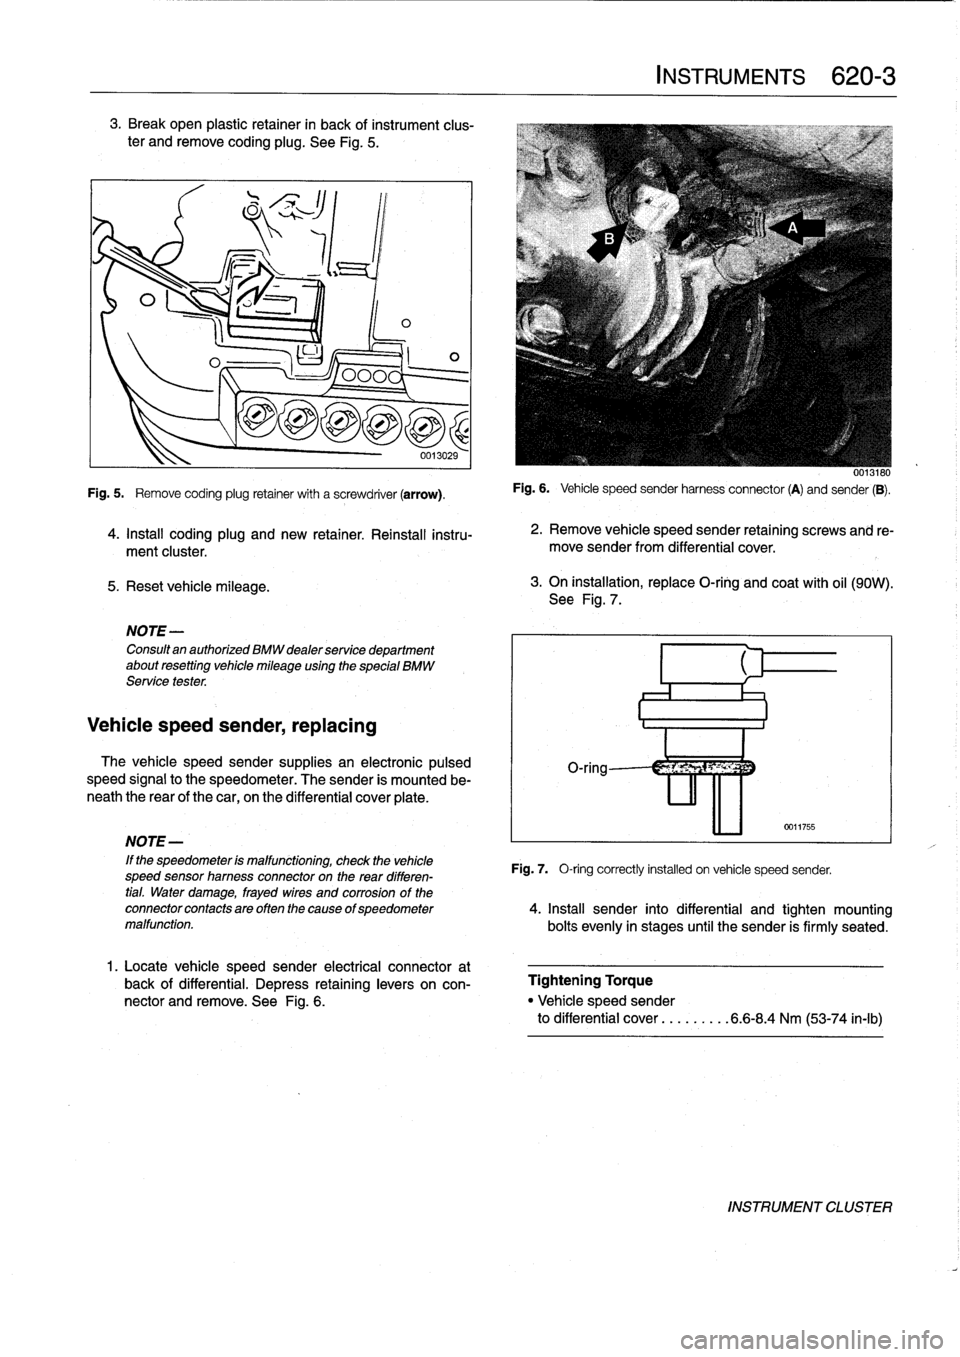 BMW 318i 1998 E36 Workshop Manual 3
.
Break
open
plastic
retainer
in
back
of
instrument
clus-
ter
andremove
coding
plug
.
See
Fig
.
5
.

5
.
Reset
vehicle
mileage
.

1
ILO

NOTE-

Consultan
authorized
BMW
dealer
service
department
abo